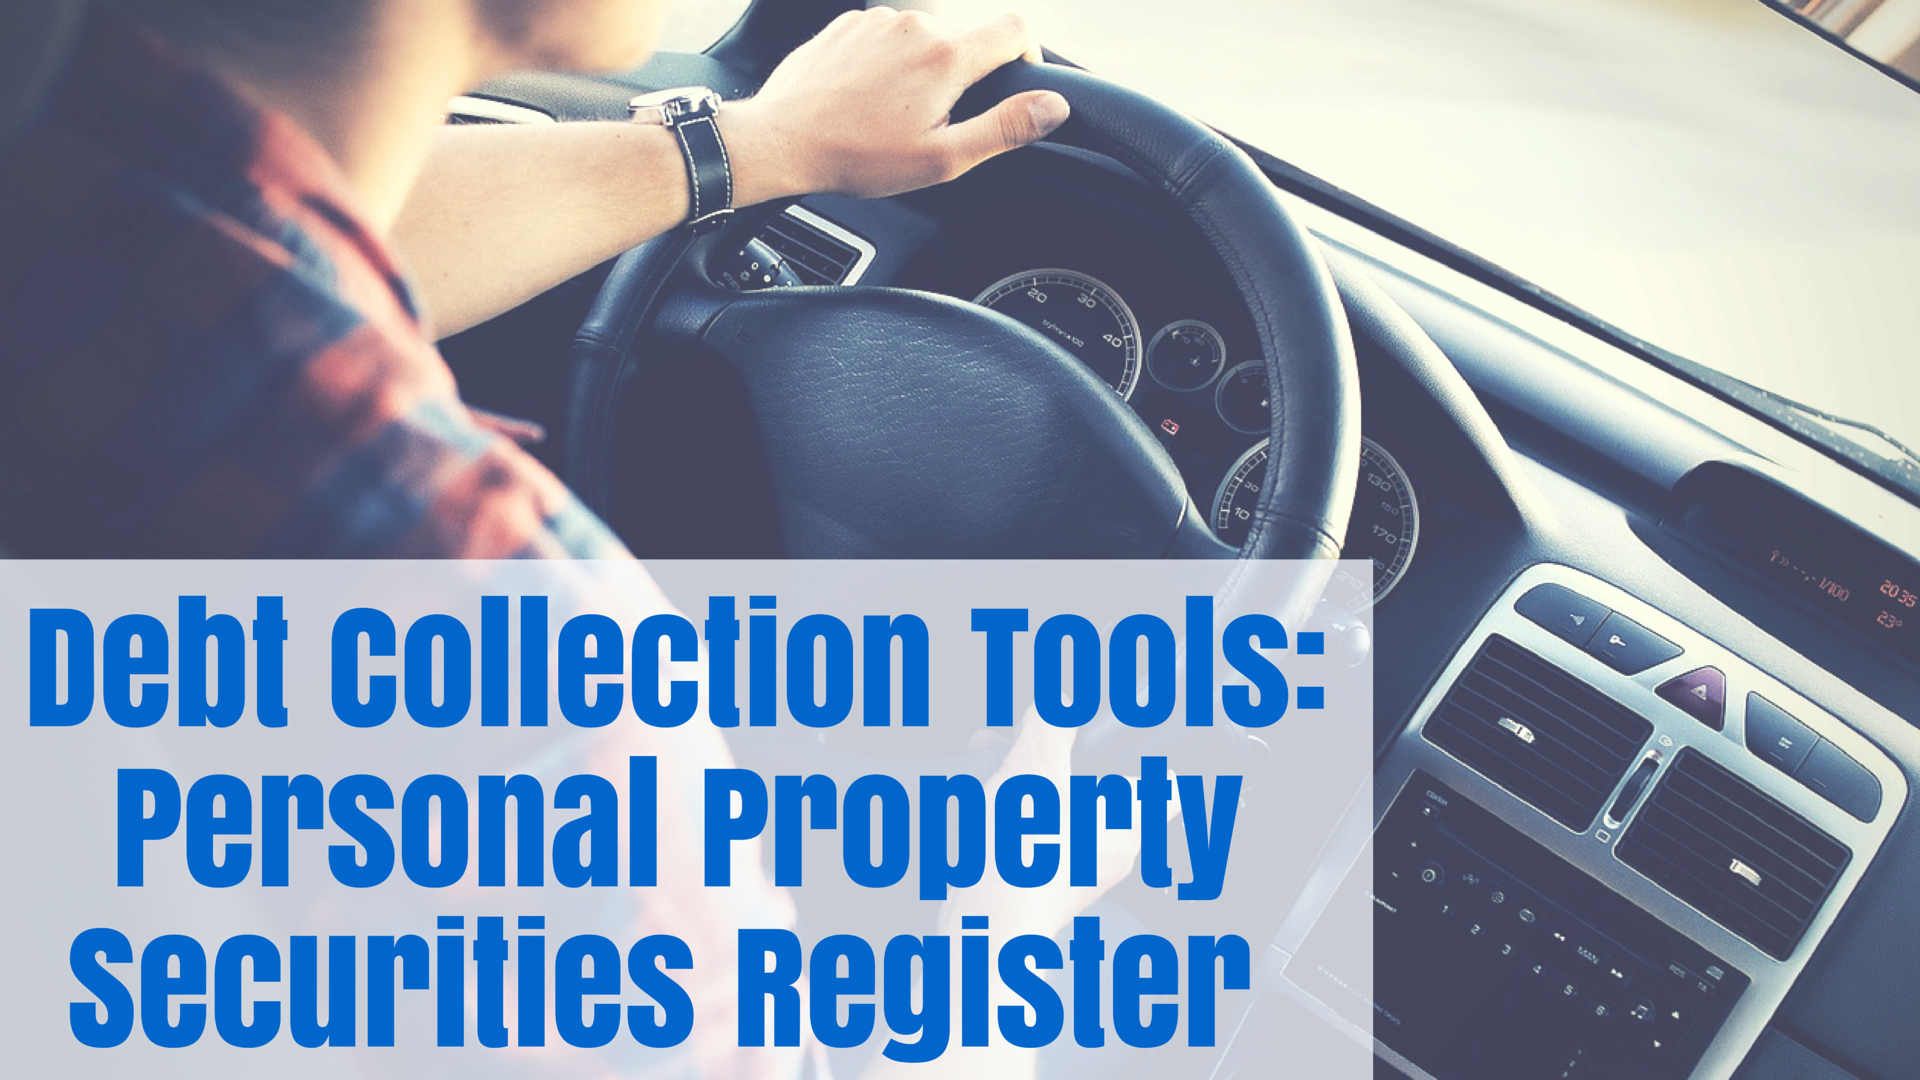 Debt Collection Tools: Personal Property Securities Register